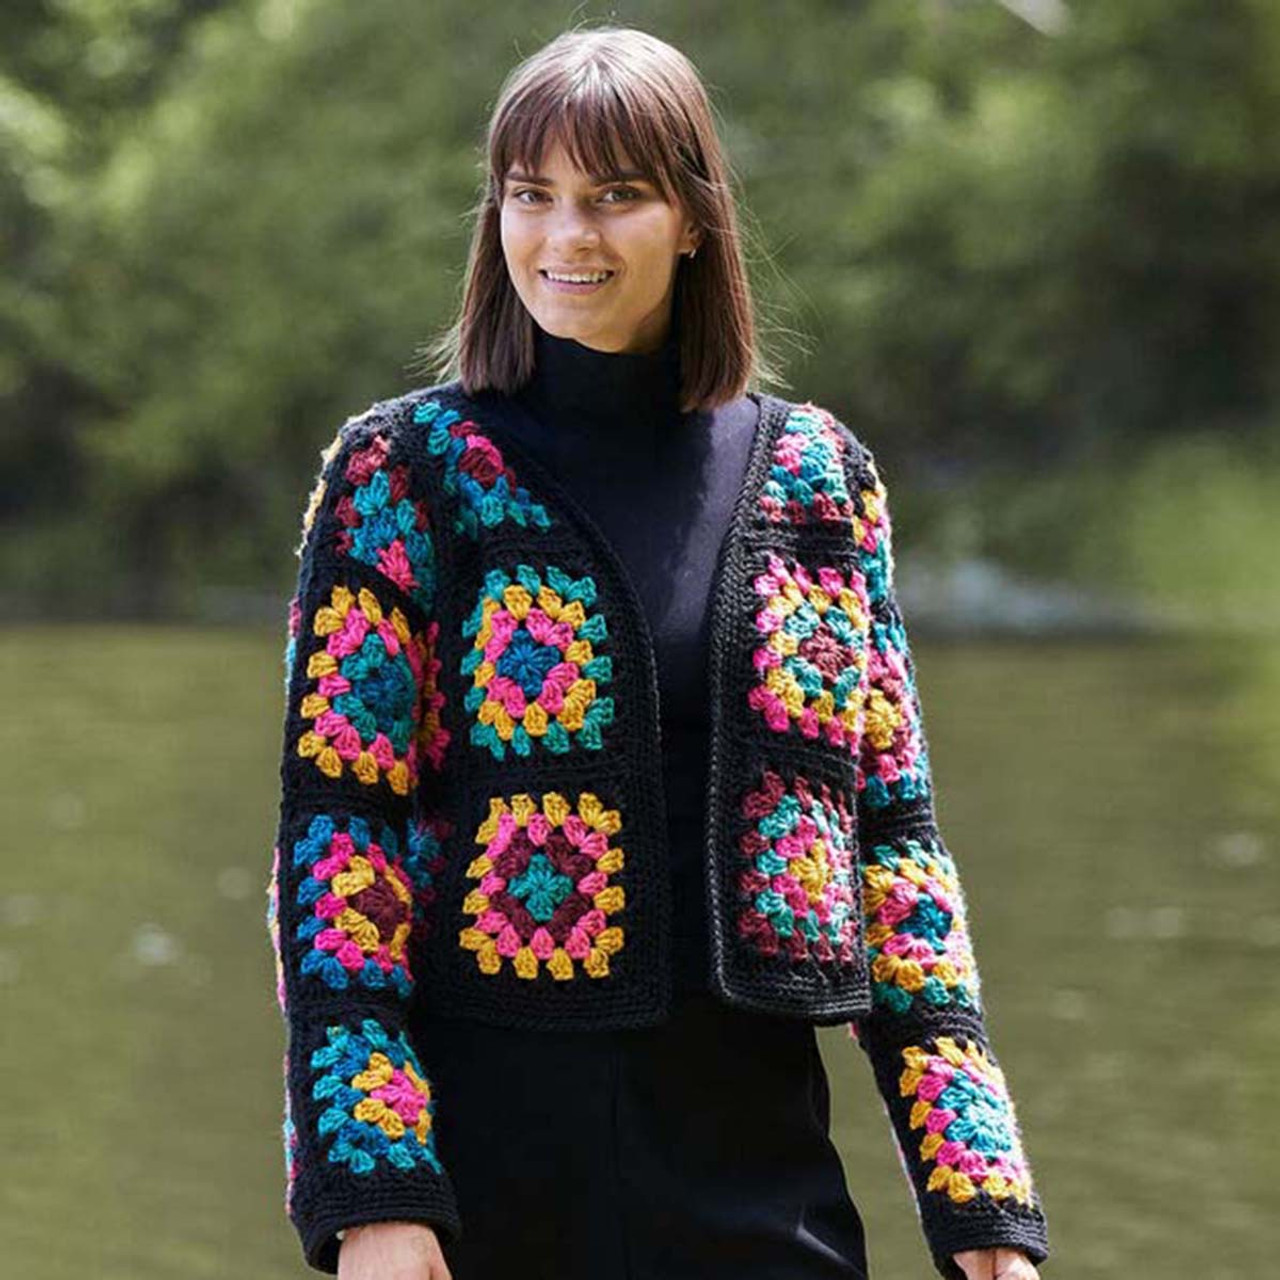 The Best 8 Granny Square Sweater Patterns - This is Crochet